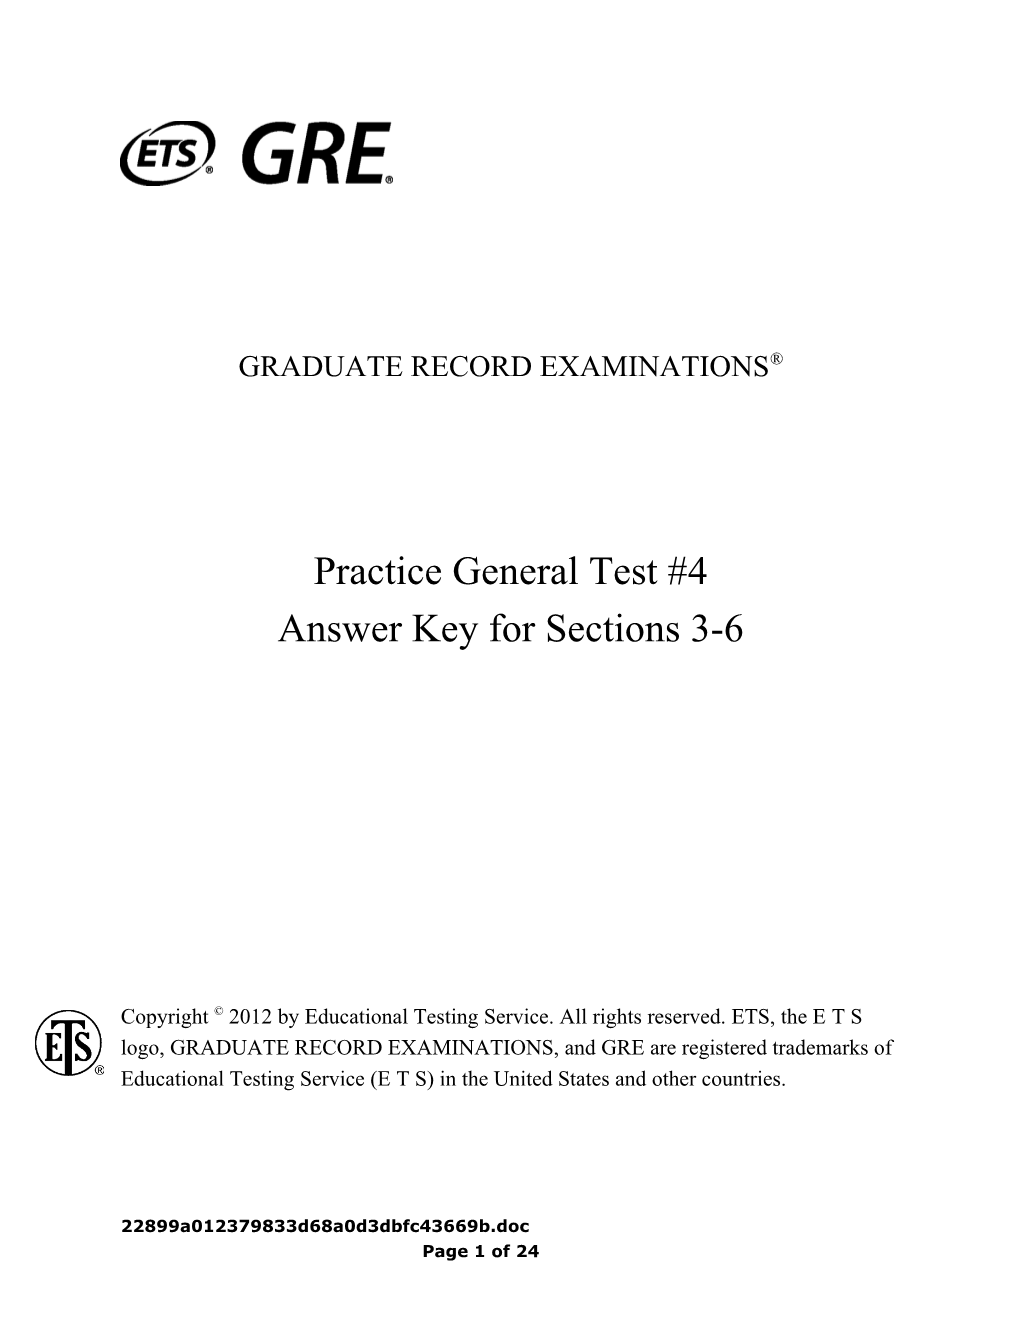 GRE Practice Test 4 Answers